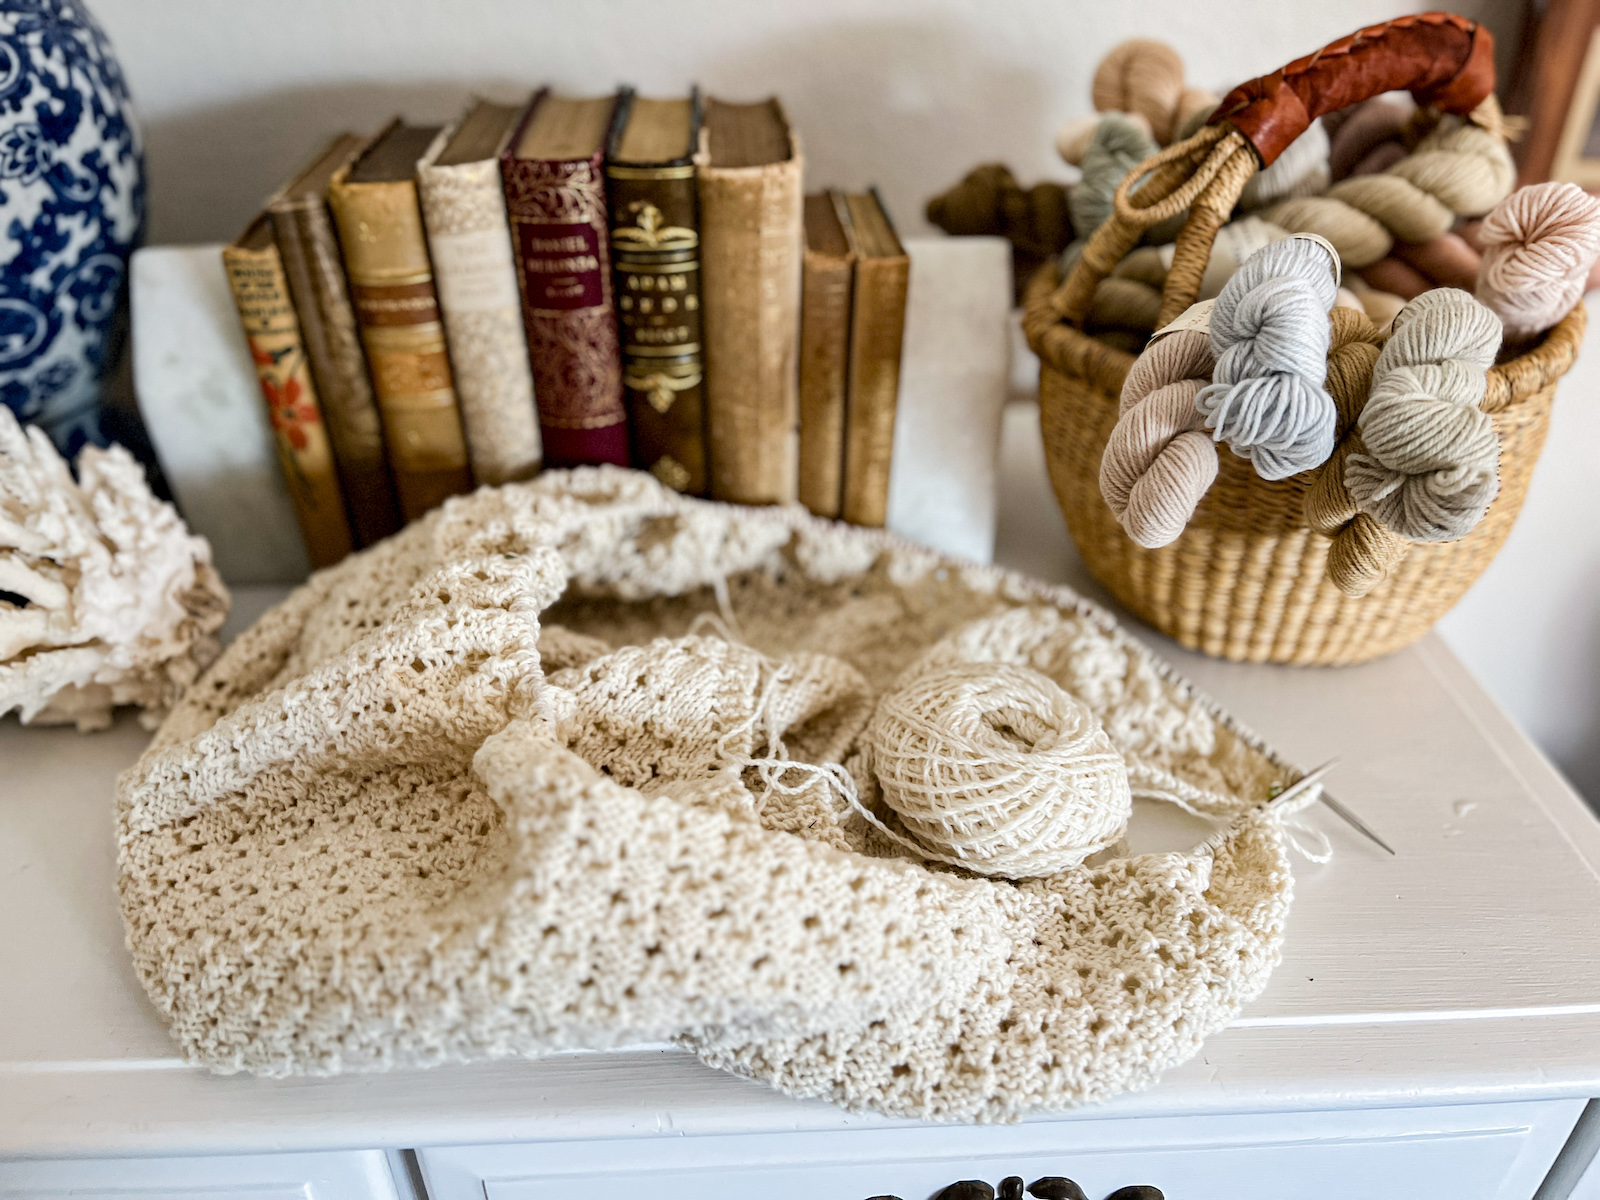 A white knit shawl in progress is piled on top of a dresser. Slightly blurred in the background are lots of antique books and a basket full of mini skeins of yarn.